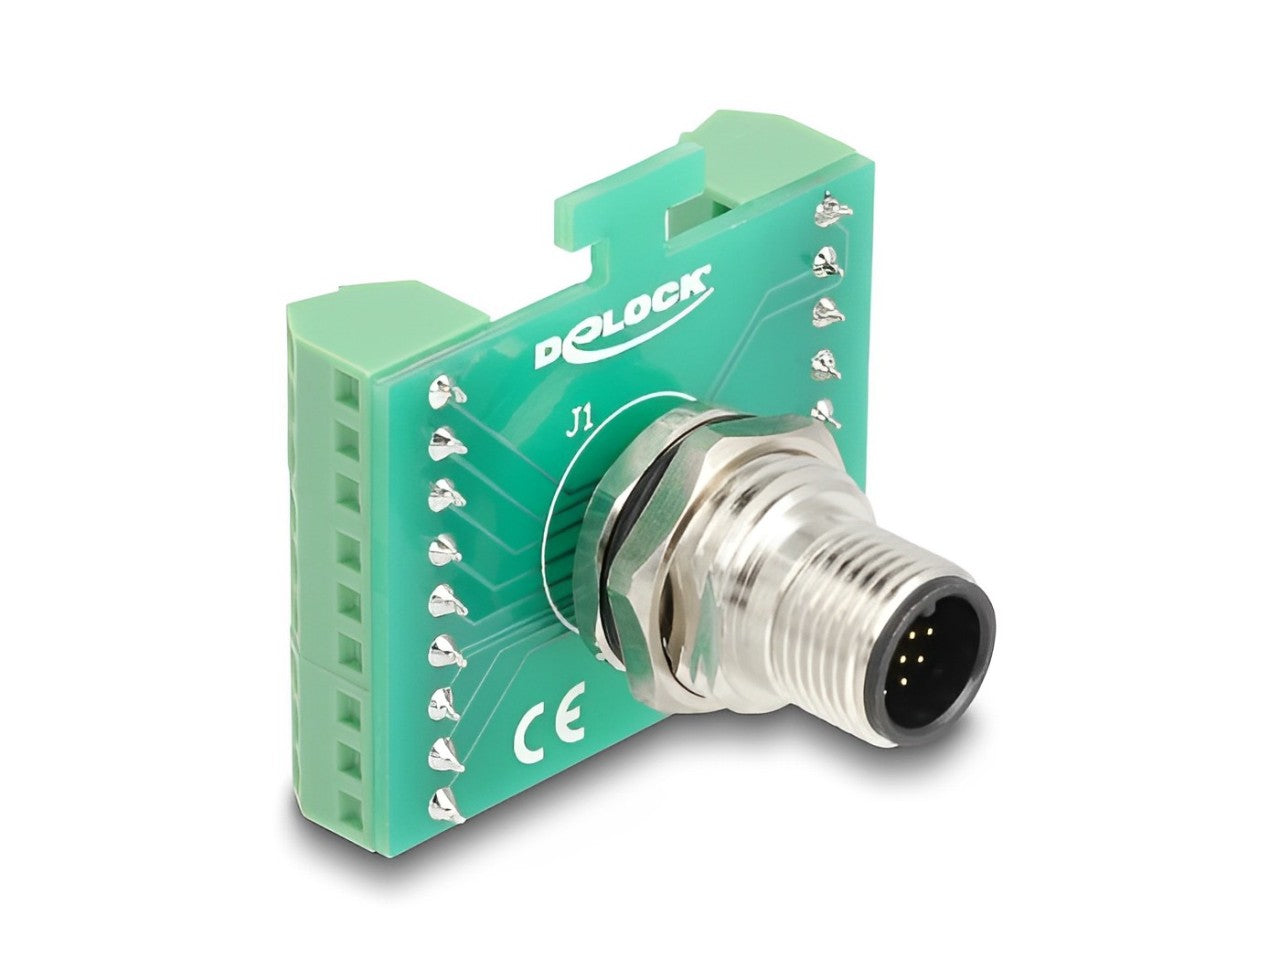 Delock M12 Transfer Module Adapter 17 pin A-coded male to 18 pin terminal block for installation - delock.israel